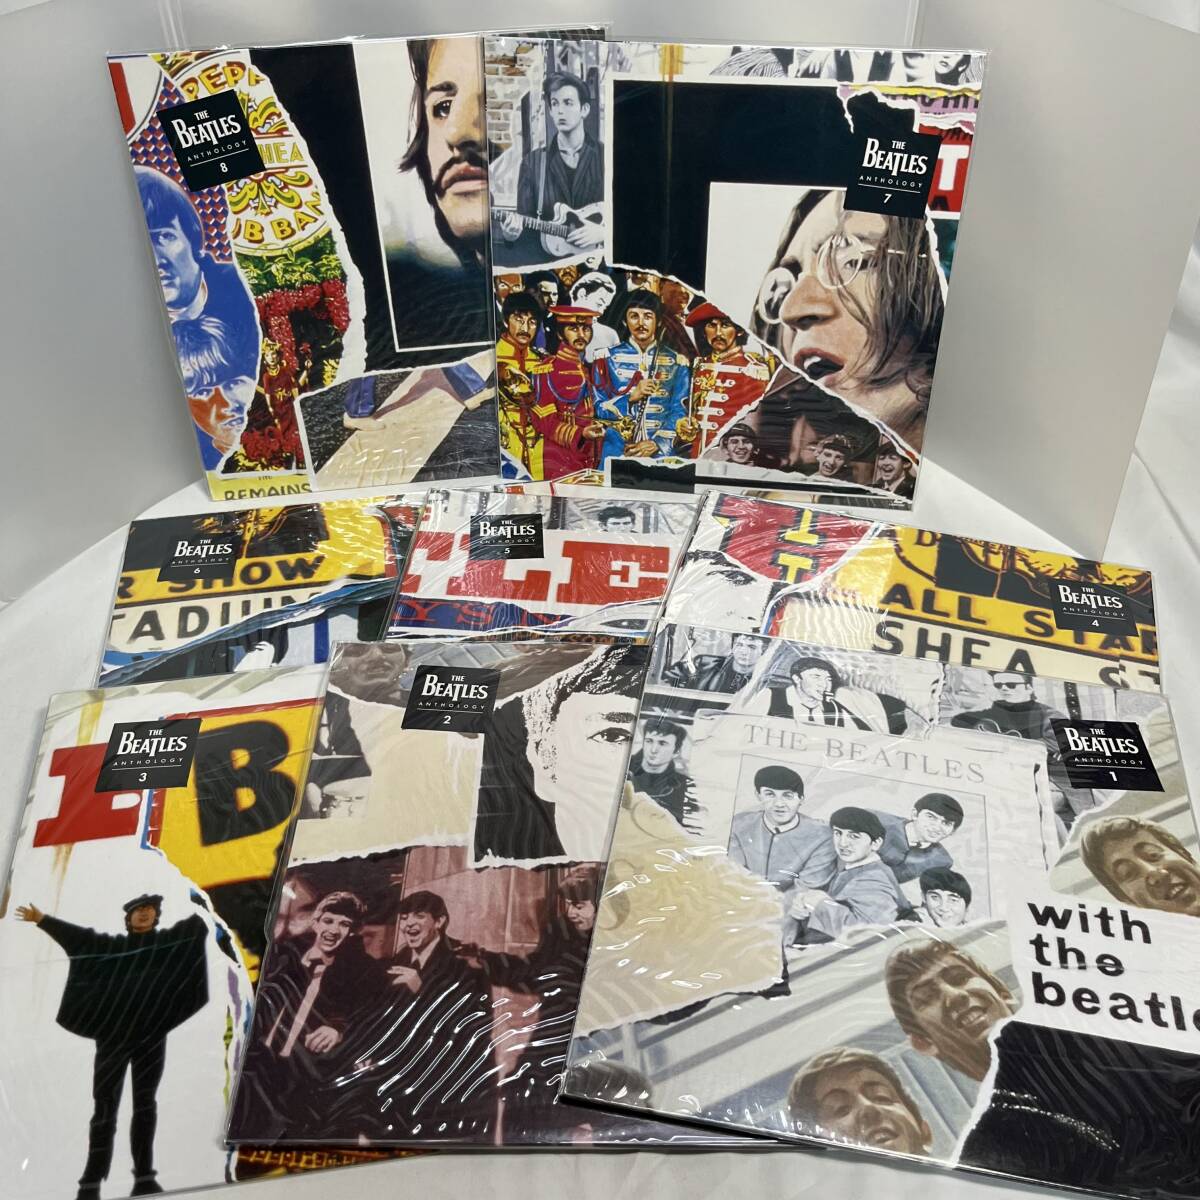 [LD] laser disk reproduction not yet verification western-style music LD8 sheets set box /Beatles[TOLW-3261-8 / The Beatles Anthology] pair watch lack of 